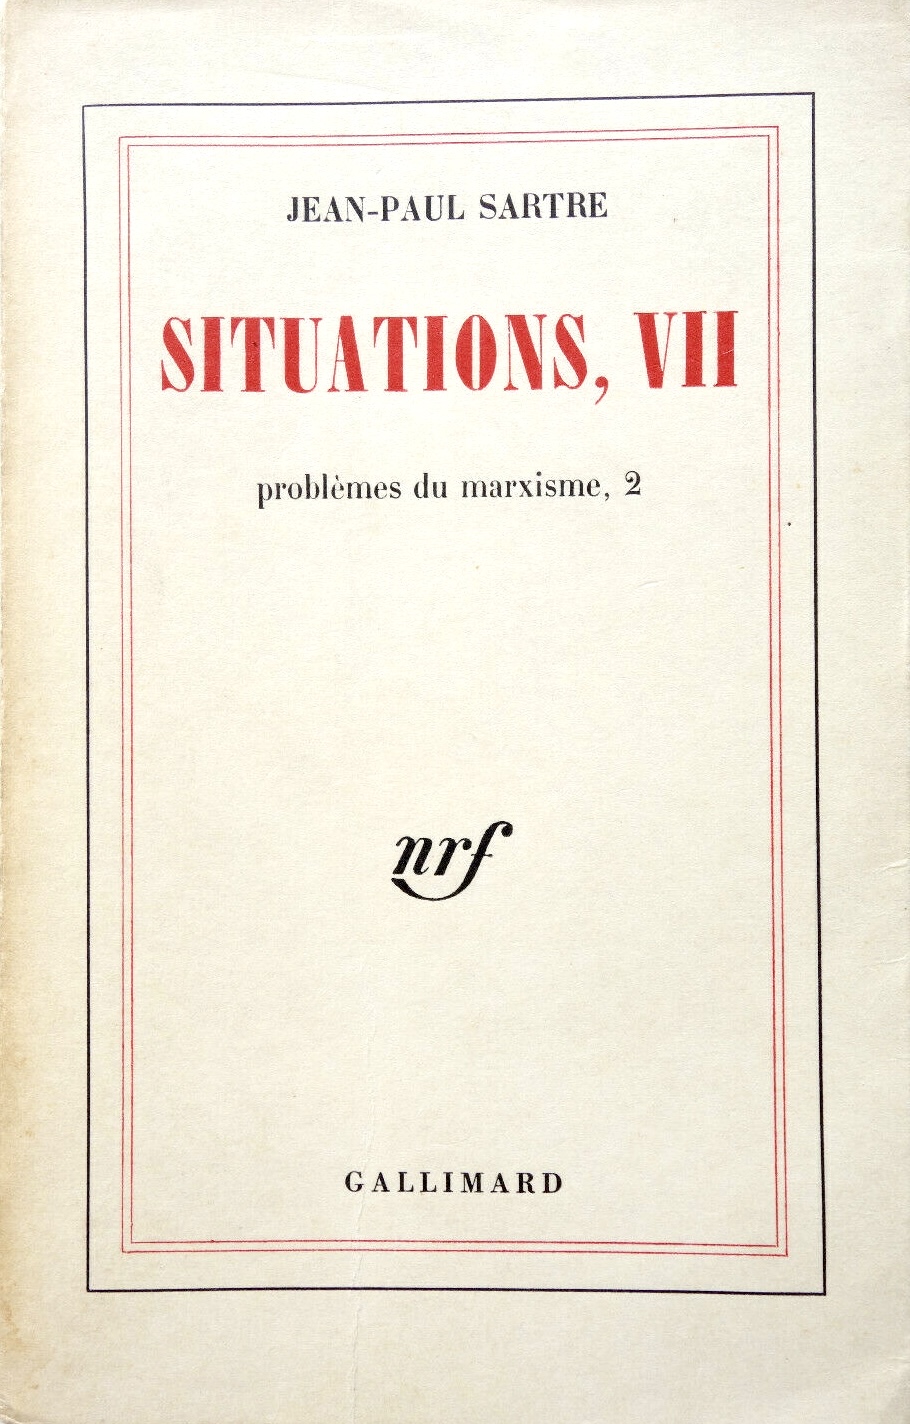 Jean-Paul Sartre, Situations, tome VII, Collection « Blanche », Gallimard